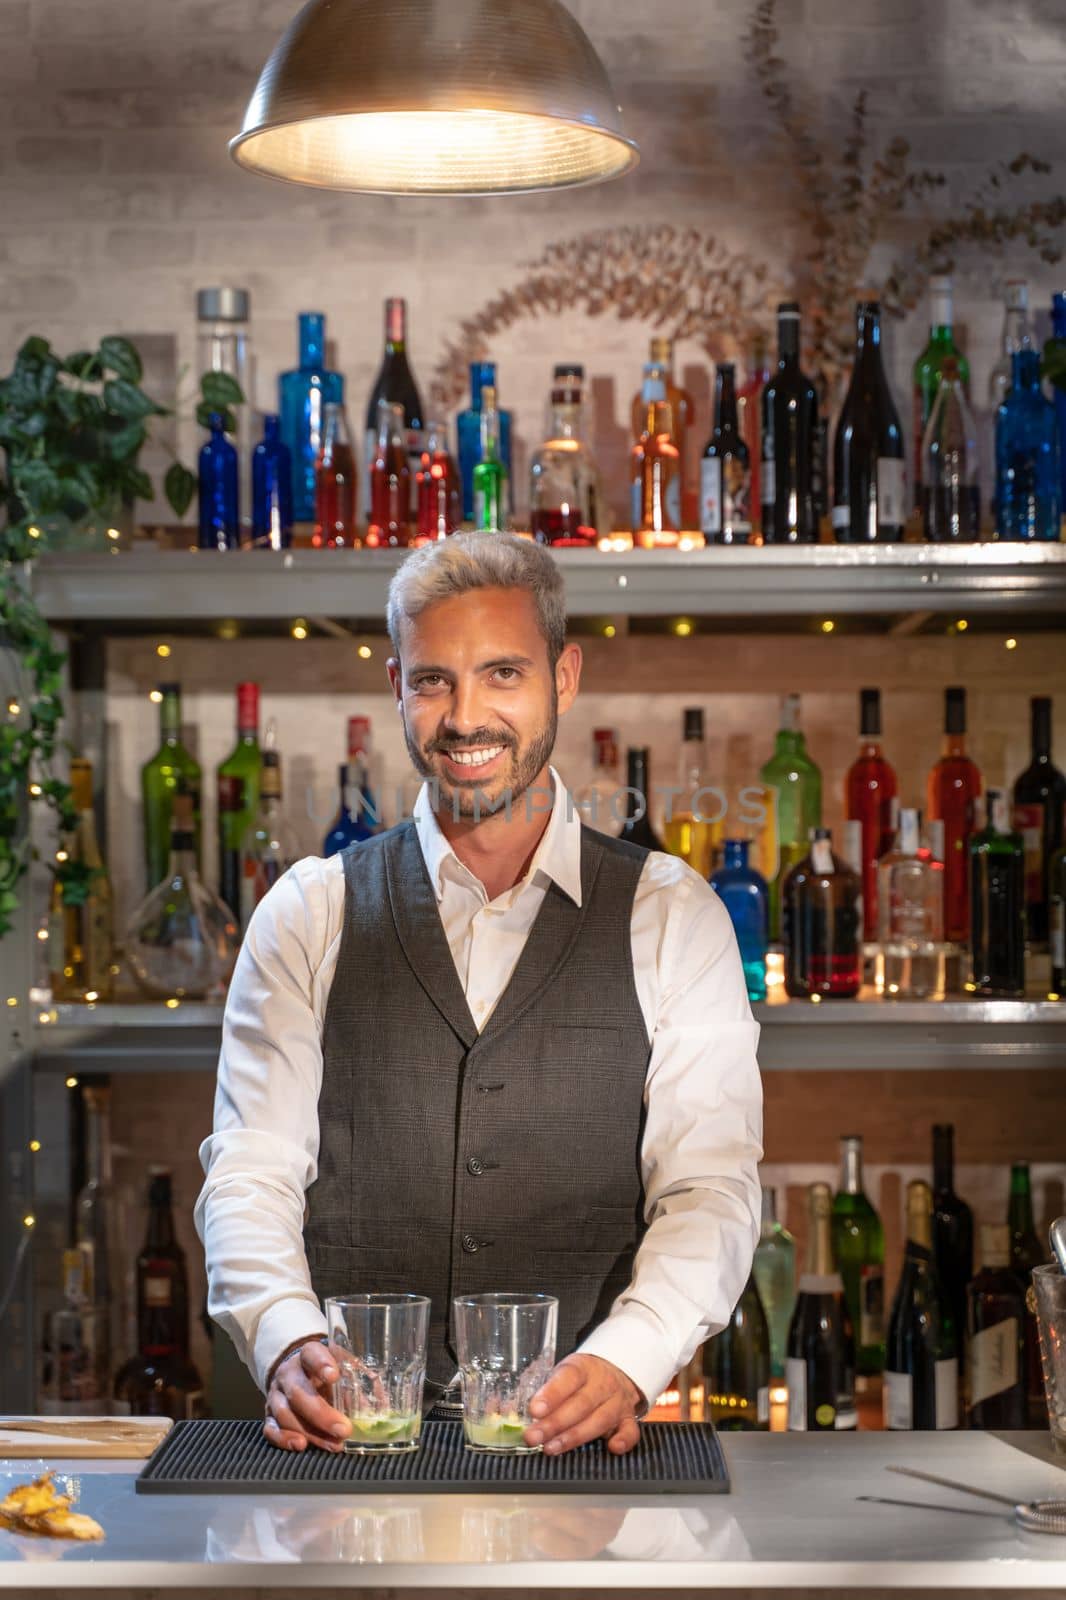 Elegant barman smiling on bar counter. by PaulCarr